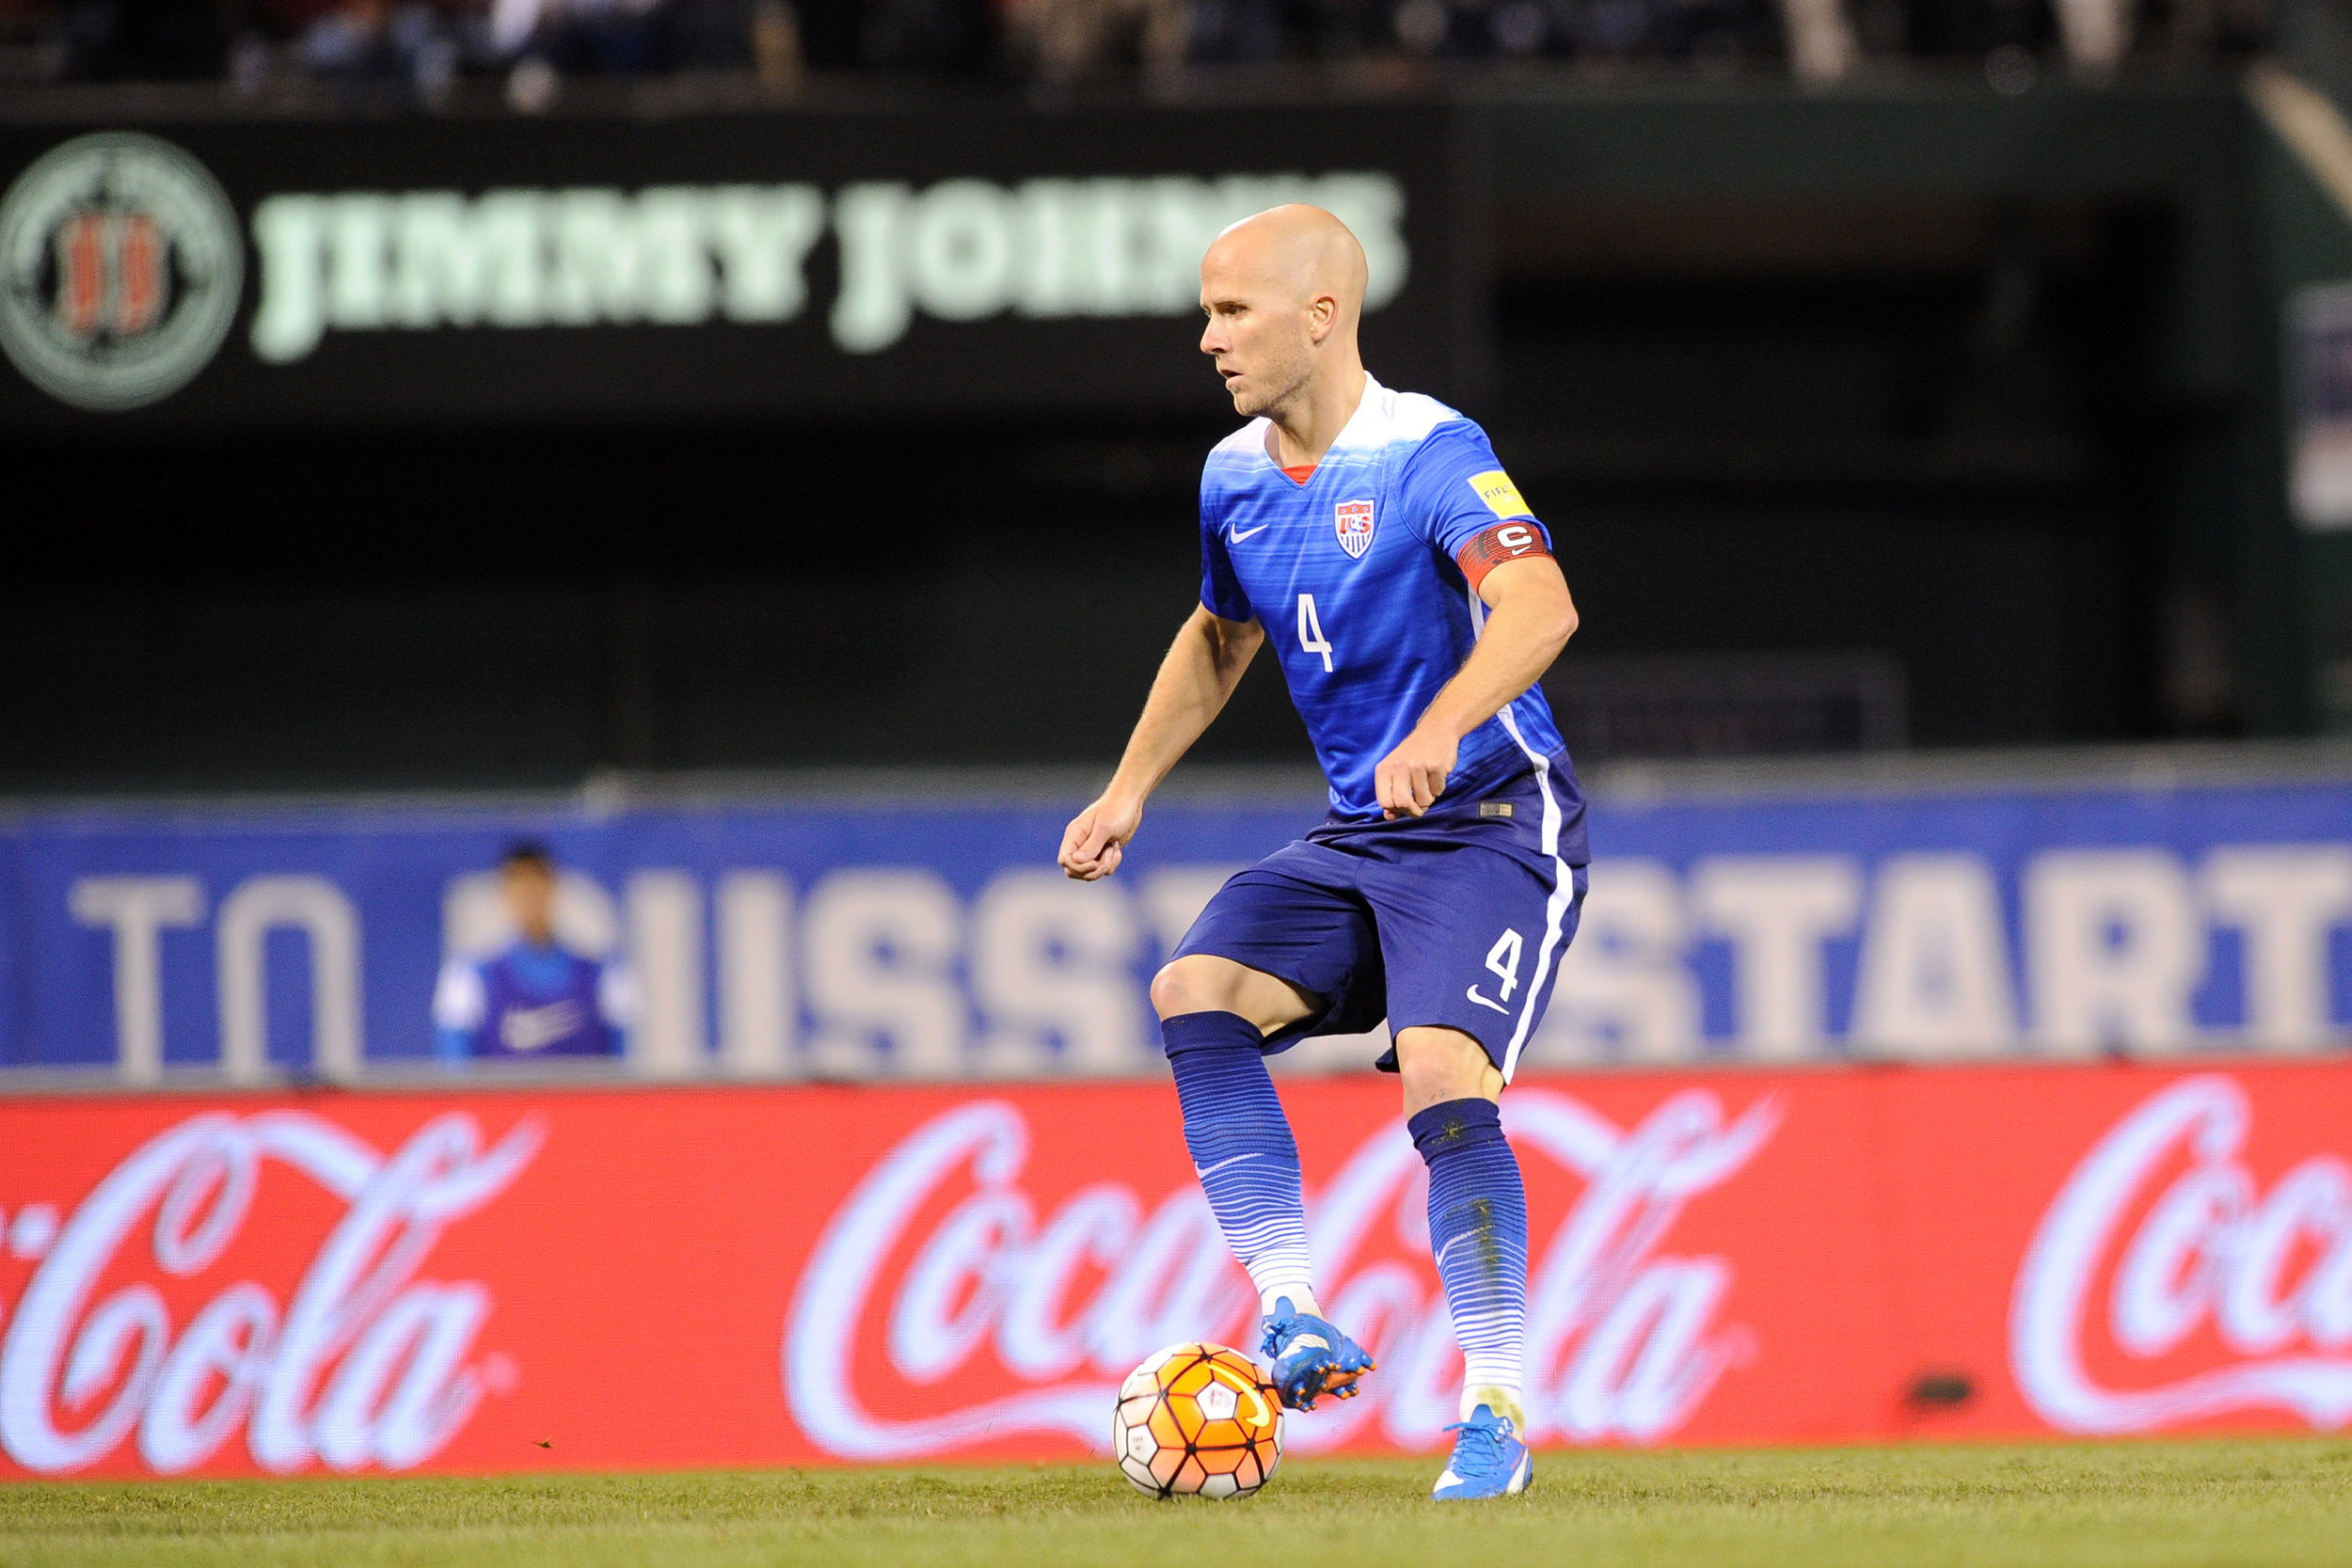 Michael Bradley St. Louis, Mo. - Friday, November 13, 2015: The USMNT defeat St. Vincent and the Grenadines 6-1 in their 2018 FIFA World Cup Qualifying match at Busch Stadium. 